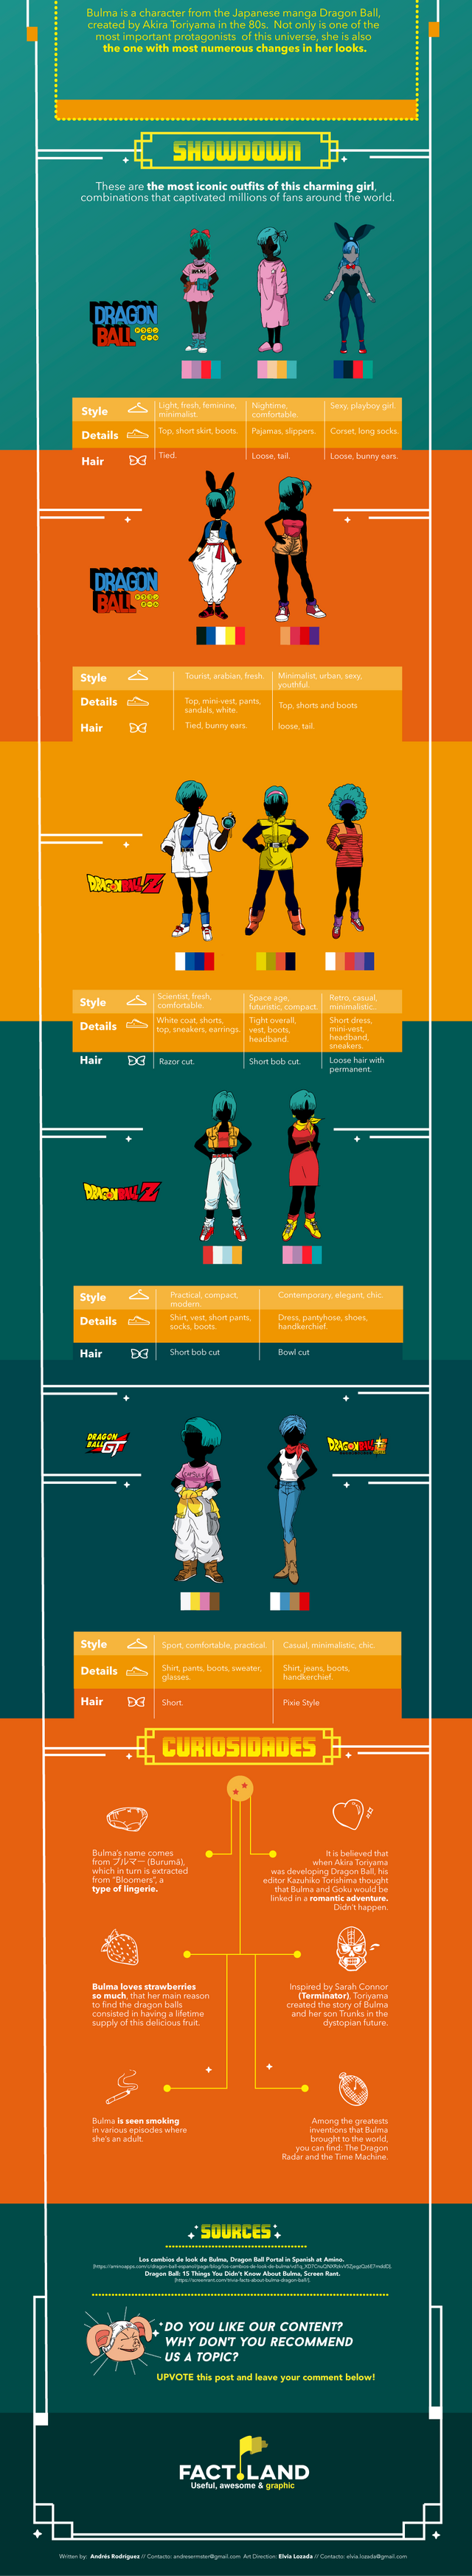 003 - ENG - The Evolution of Bulma in Dragon Ball (2).png